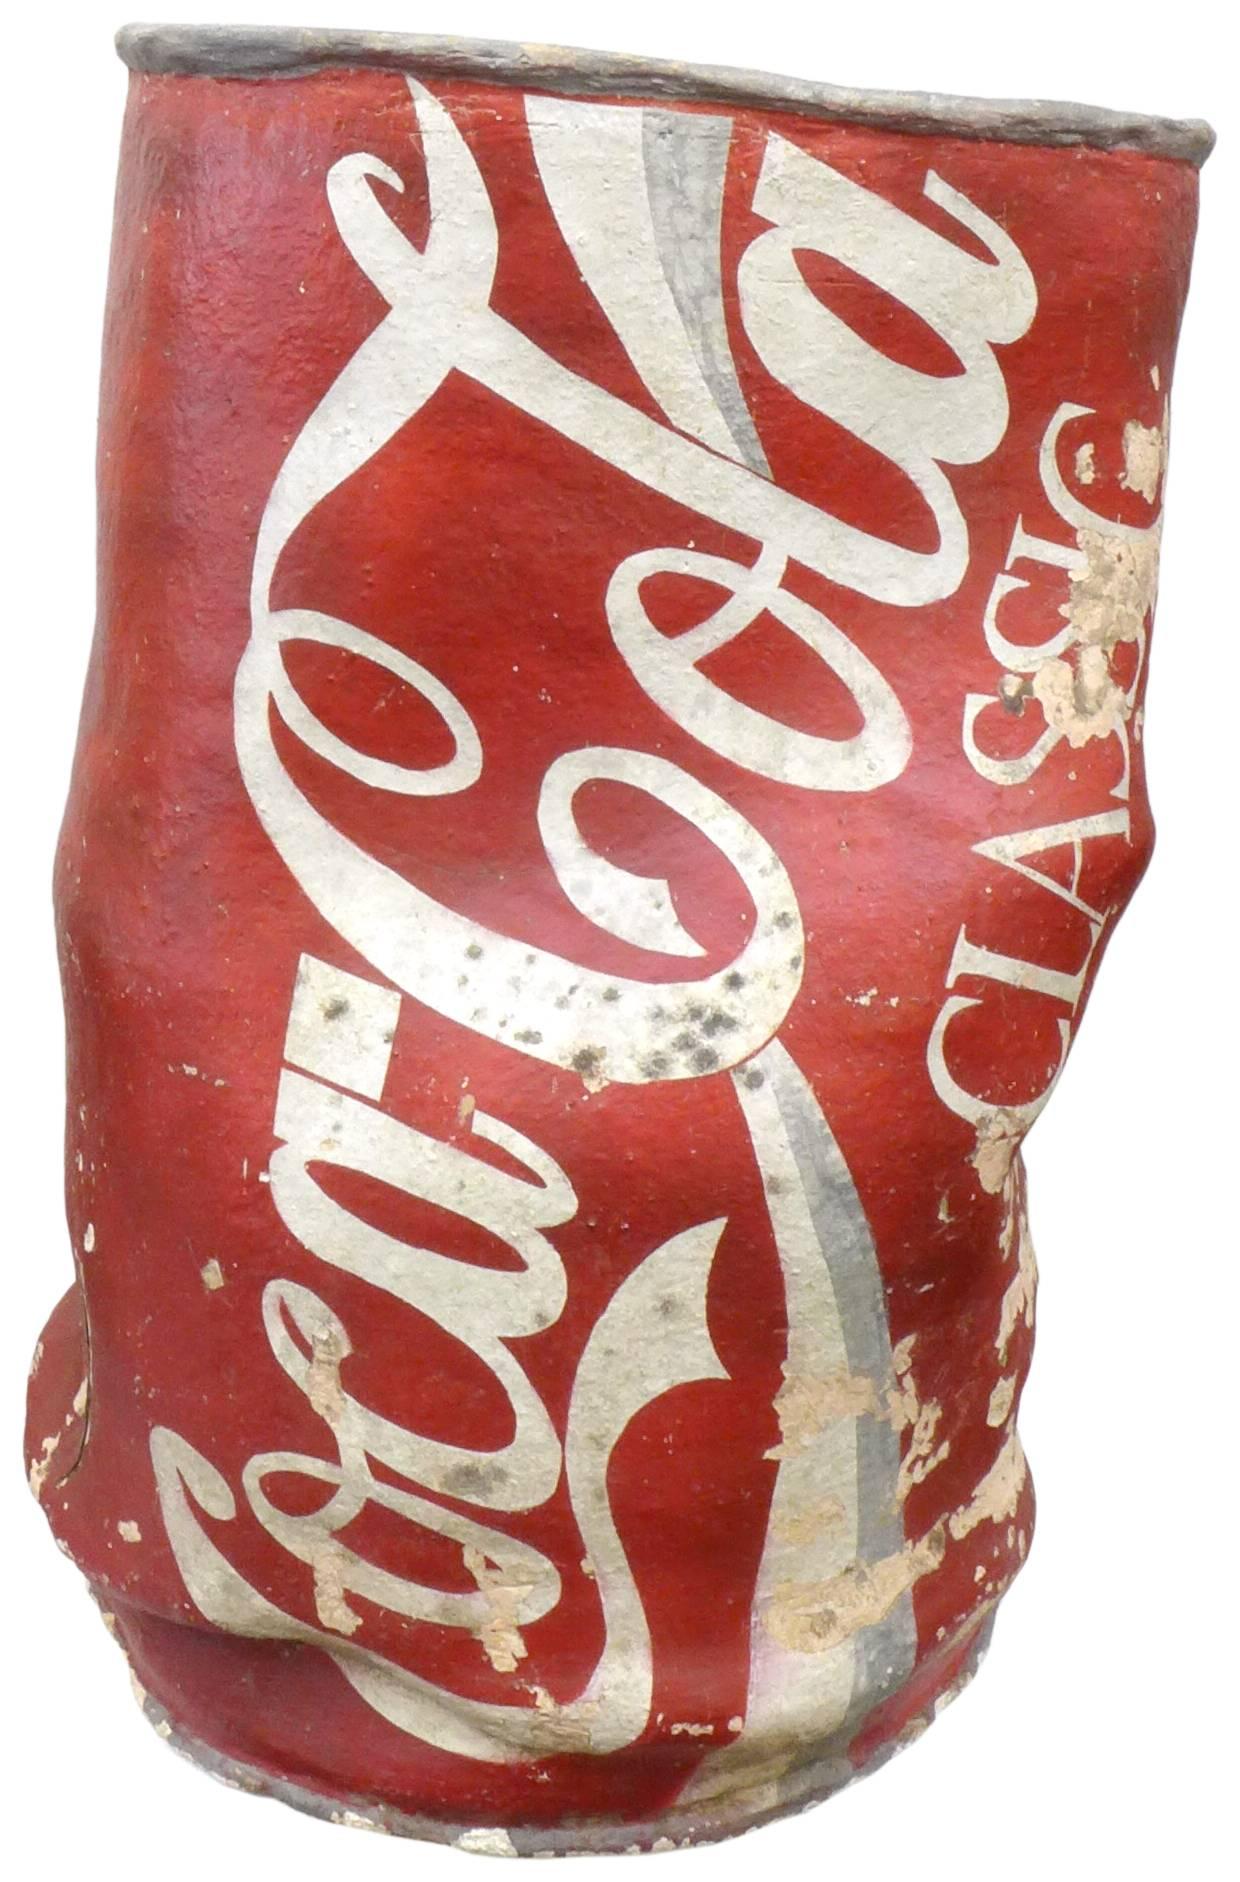 A unique and exceptional, Pop Art-meets-Folk Art, hand-made, ceramic, Coca Cola can sculpture. A wonderfully-whimsical and beautifully-conceived sculptural work of great scale, executed in hand-formed and hand-painted terra-cotta. Fantastic details